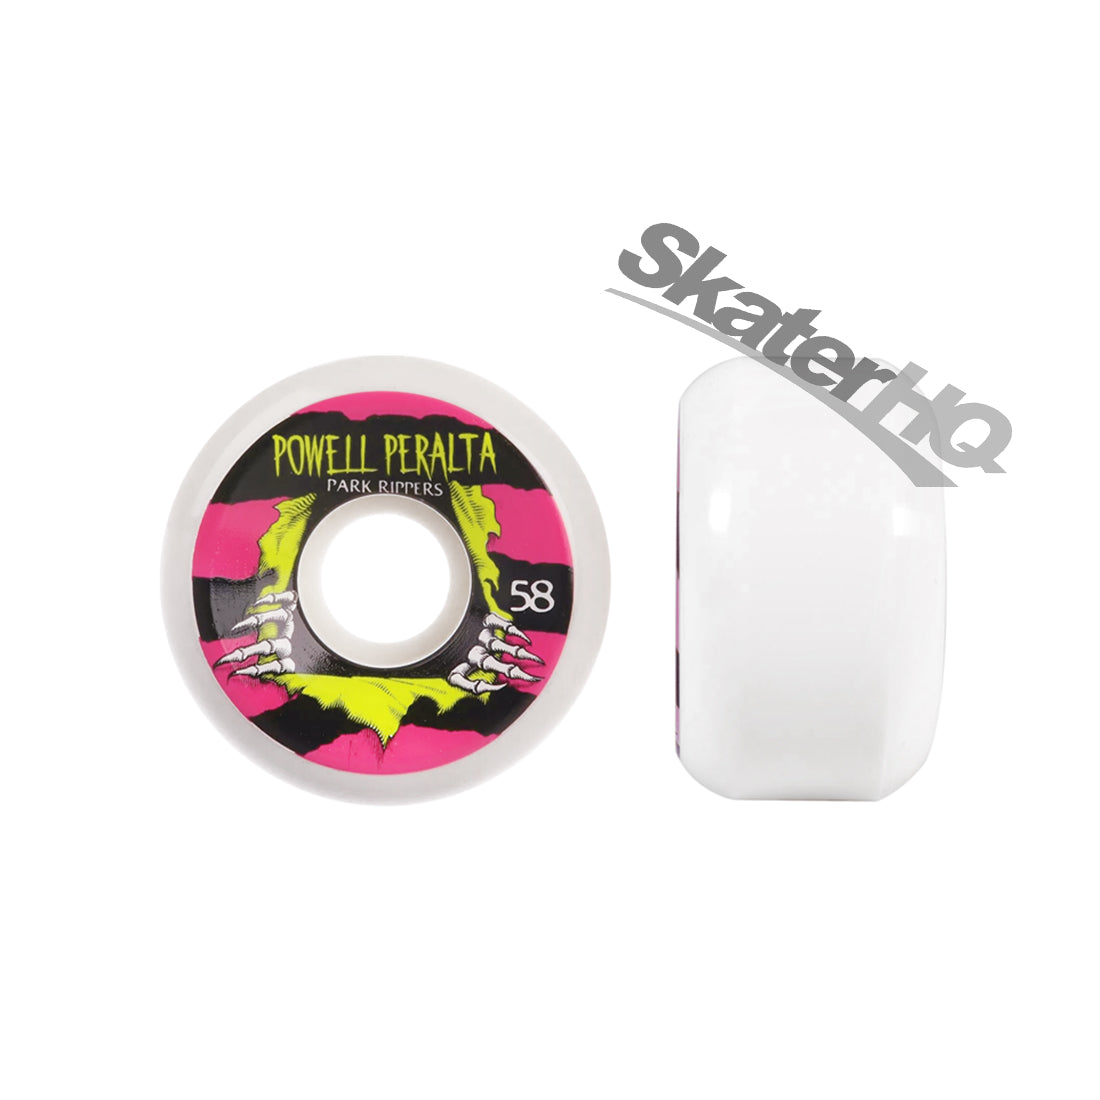 Powell Peralta PF 58mm 104a Park Rippers - Pink - Skater HQ